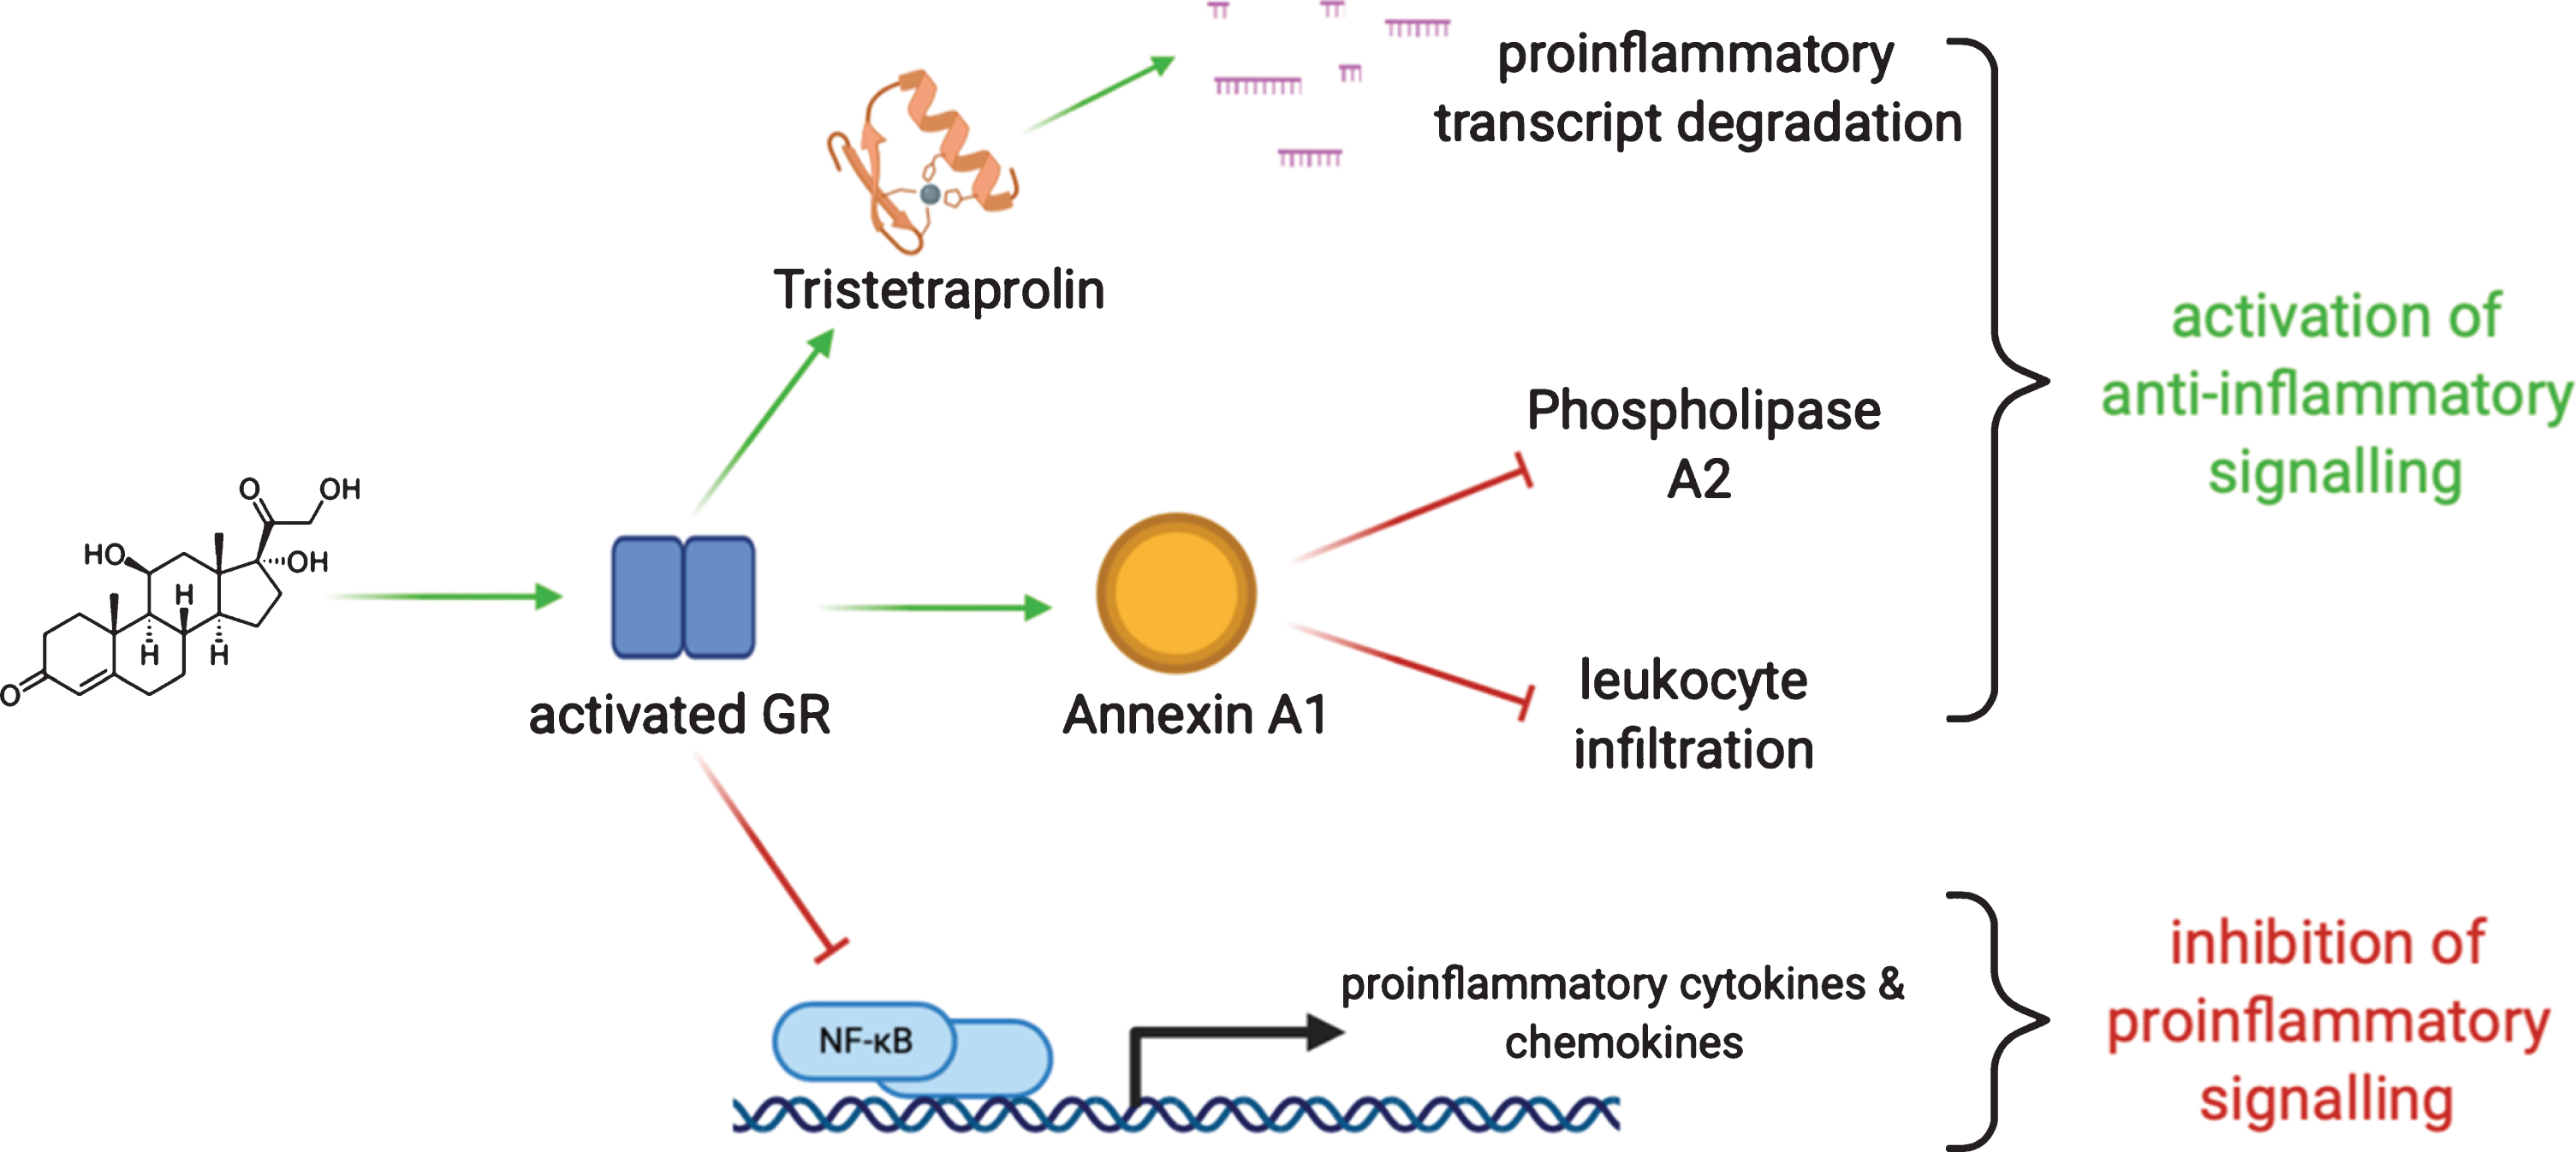 Glucocorticoids act through the glucocorticoid receptor (GR). GR activation promotes degradation of transcripts mediating proinflammatory signals through, among other mechanisms, RNA-binding proteins like tristetrapolin. GR activation also stimulates the expression of annexin A1 which serves to orchestrate termination of inflammation and avoid adverse prolonged activation. GR activation also acts directly to limit the action of key proinflammatory mediators.